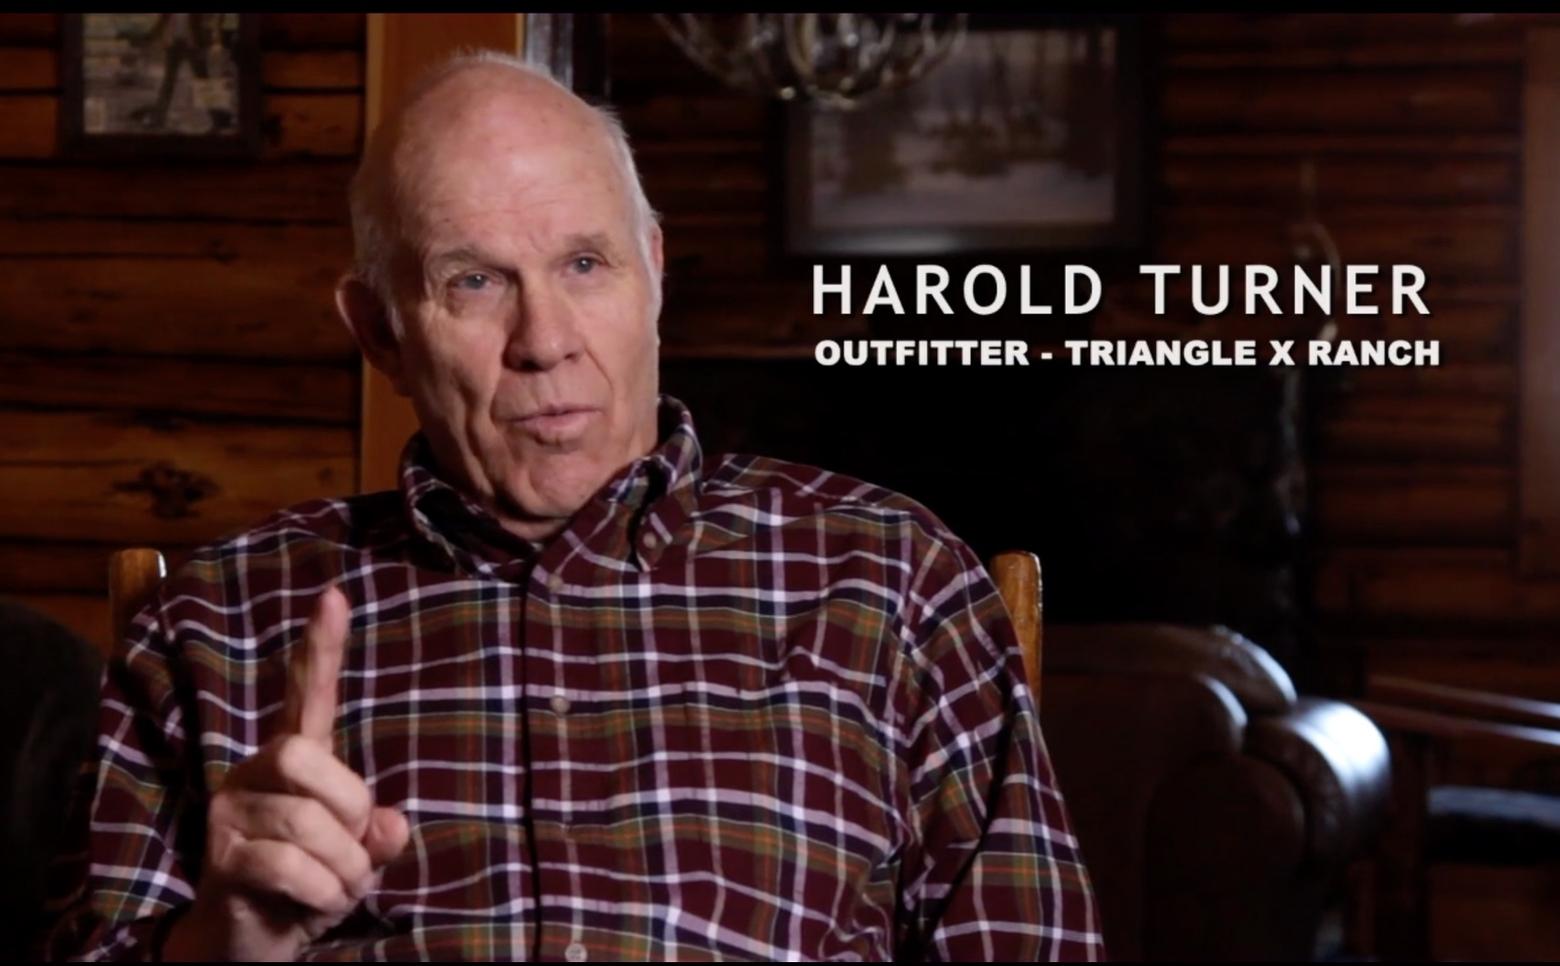 Screenshot of Jackson Hole outfitter and guide Harold Turner giving interview to filmmaker Danny Schmidt in his documentary Feeding The Problem. Mr. Turner vigorously opposes shutting down artificial feeding of elk.